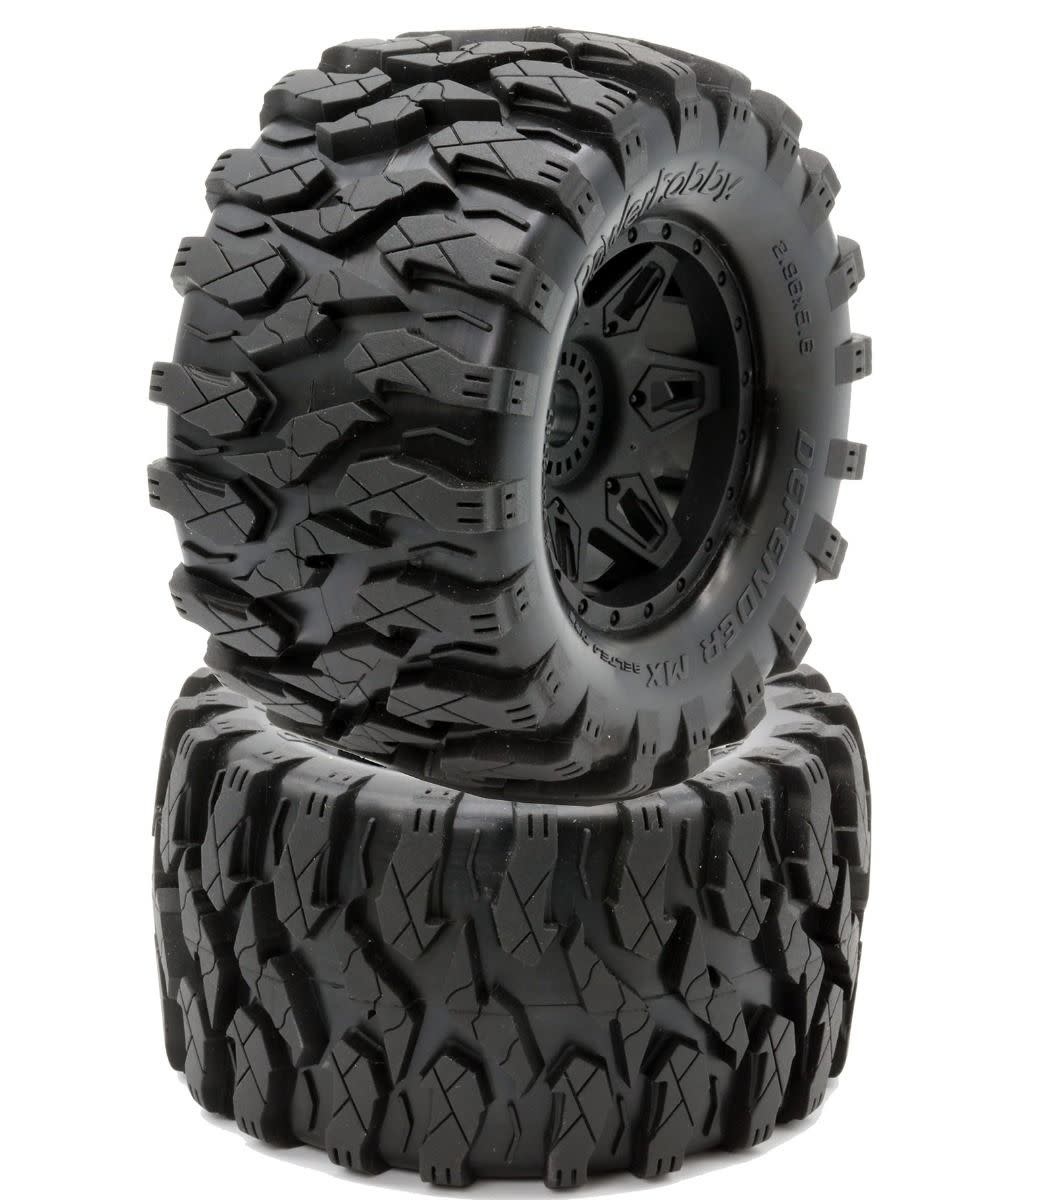 Power Hobby PHT2383 Defender MX Belted All Terrain Tires Mounted 17mm Traxxas Maxx